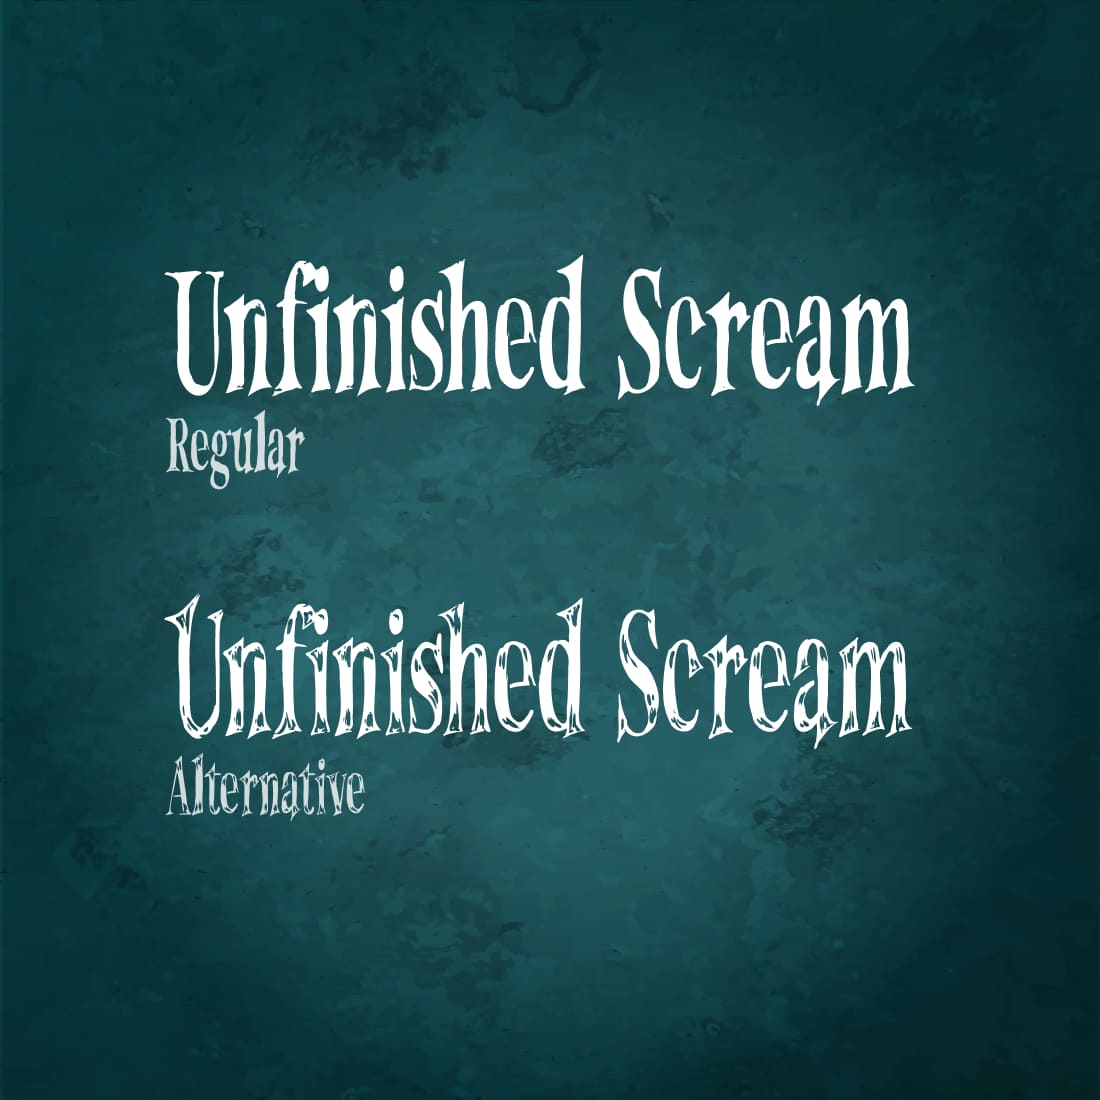 Unfinished Scream Free Font Regular and Alternative Preview Image.